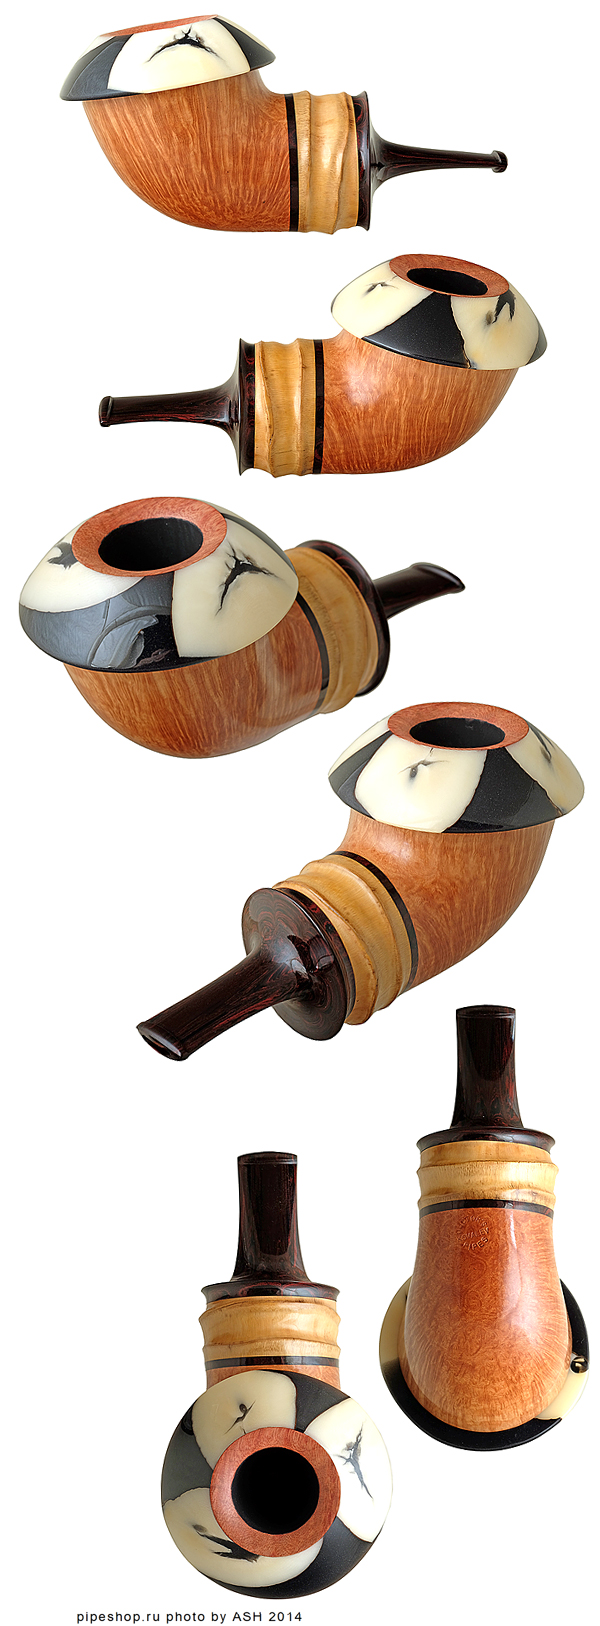   KOVALEV DOCTOR`S PIPES SMOOTH BUDDHA BAMBOO CALABASH WITH POLYMERIZED TAGUA NUT